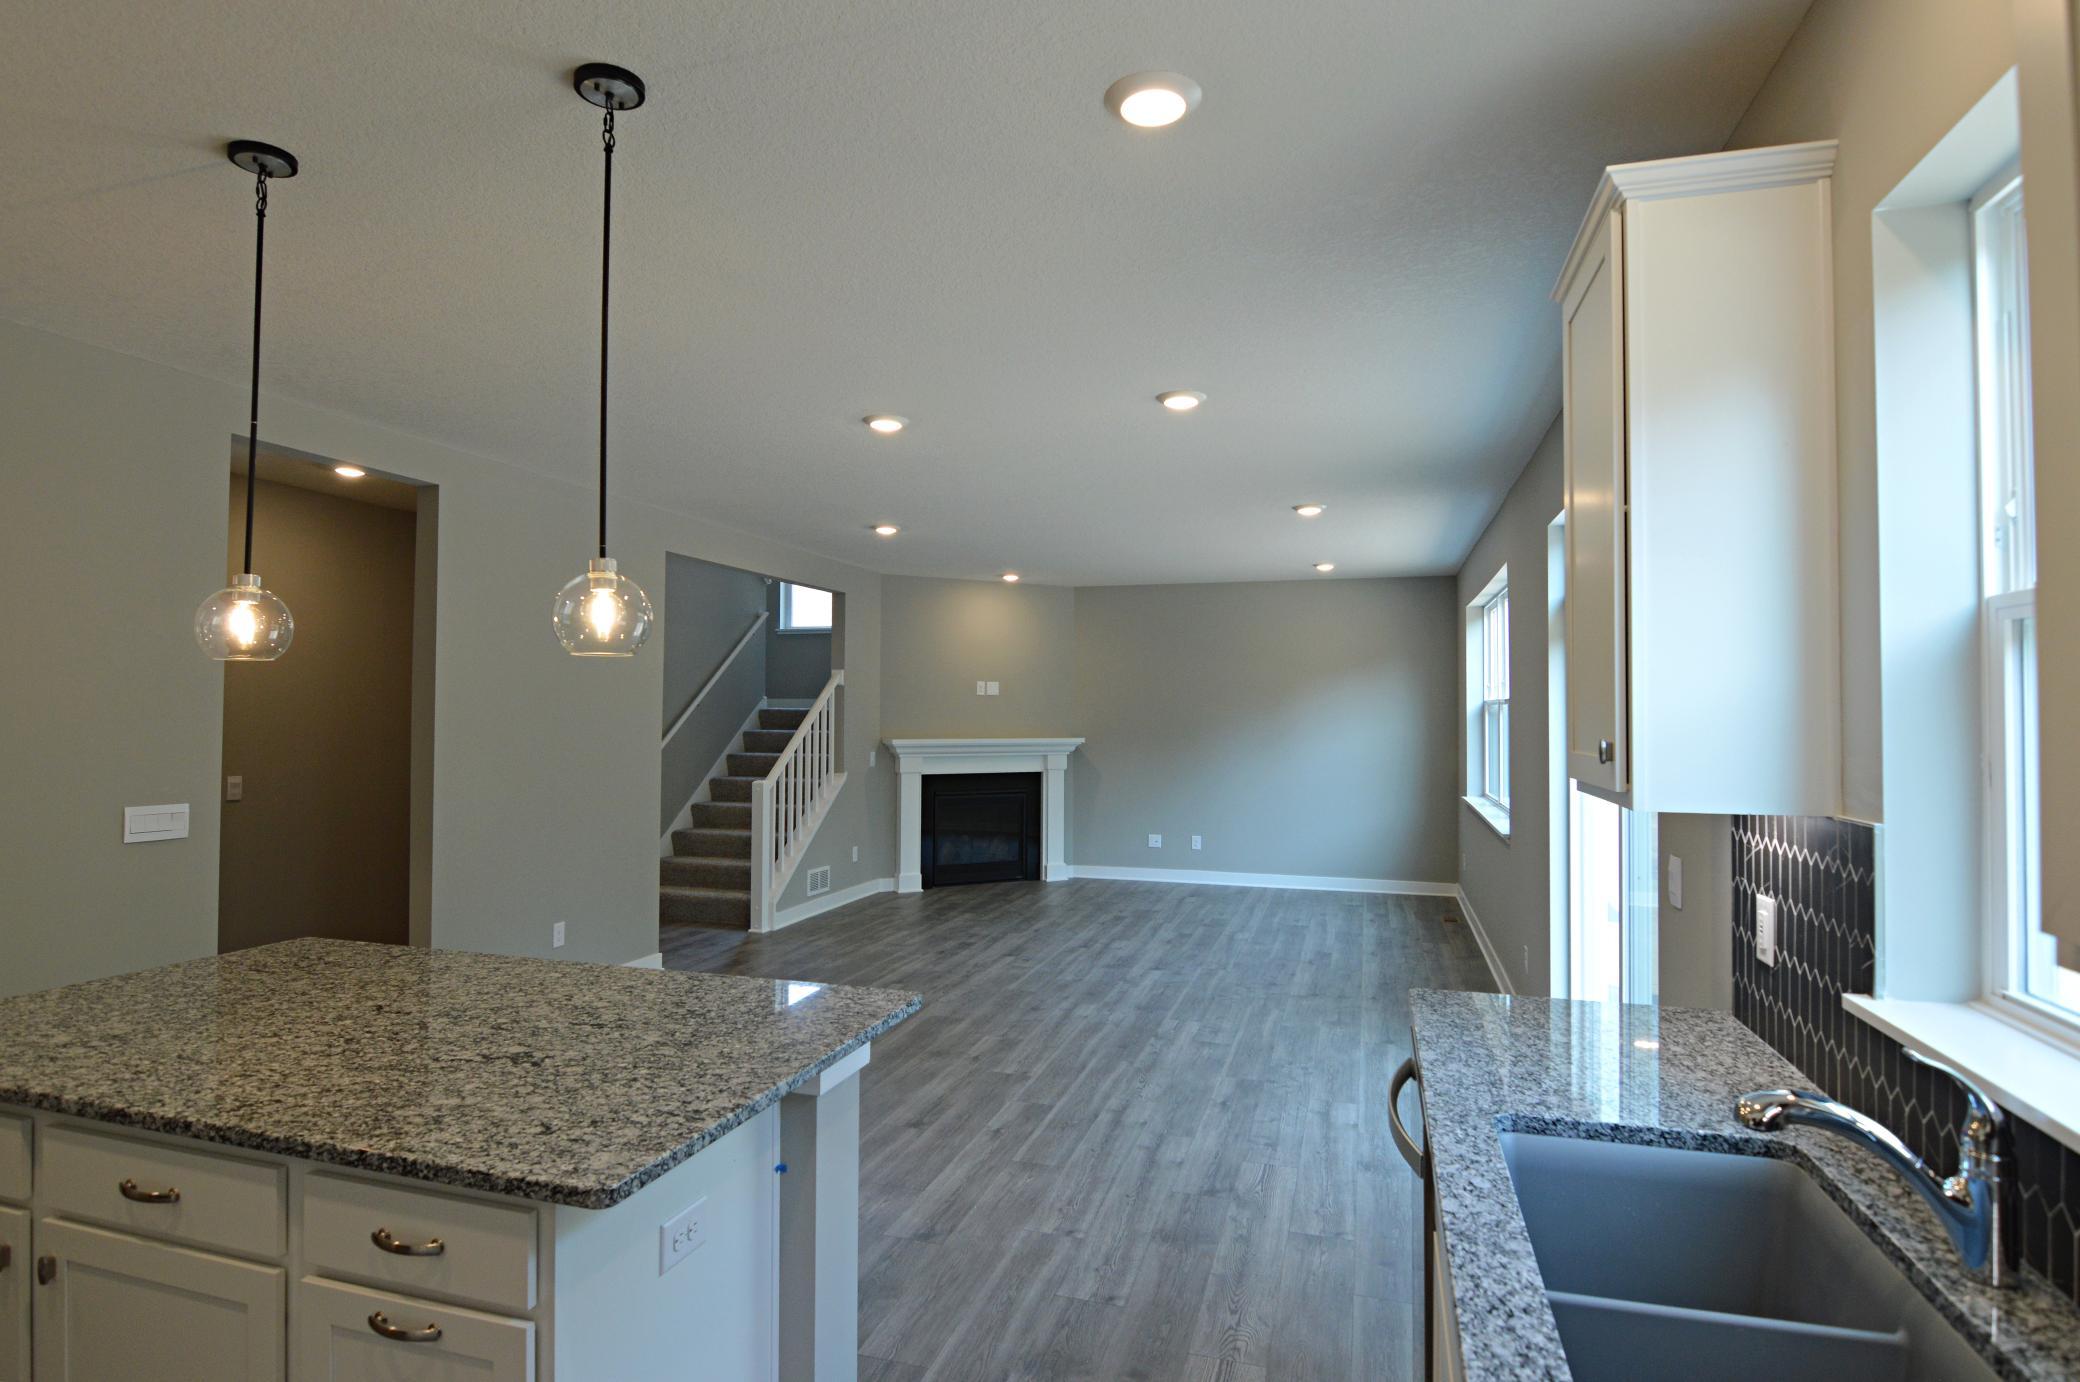 The open-concept floor plan epitomizes itself in a plan that flows seamlessly from kitchen to dining to the family room!